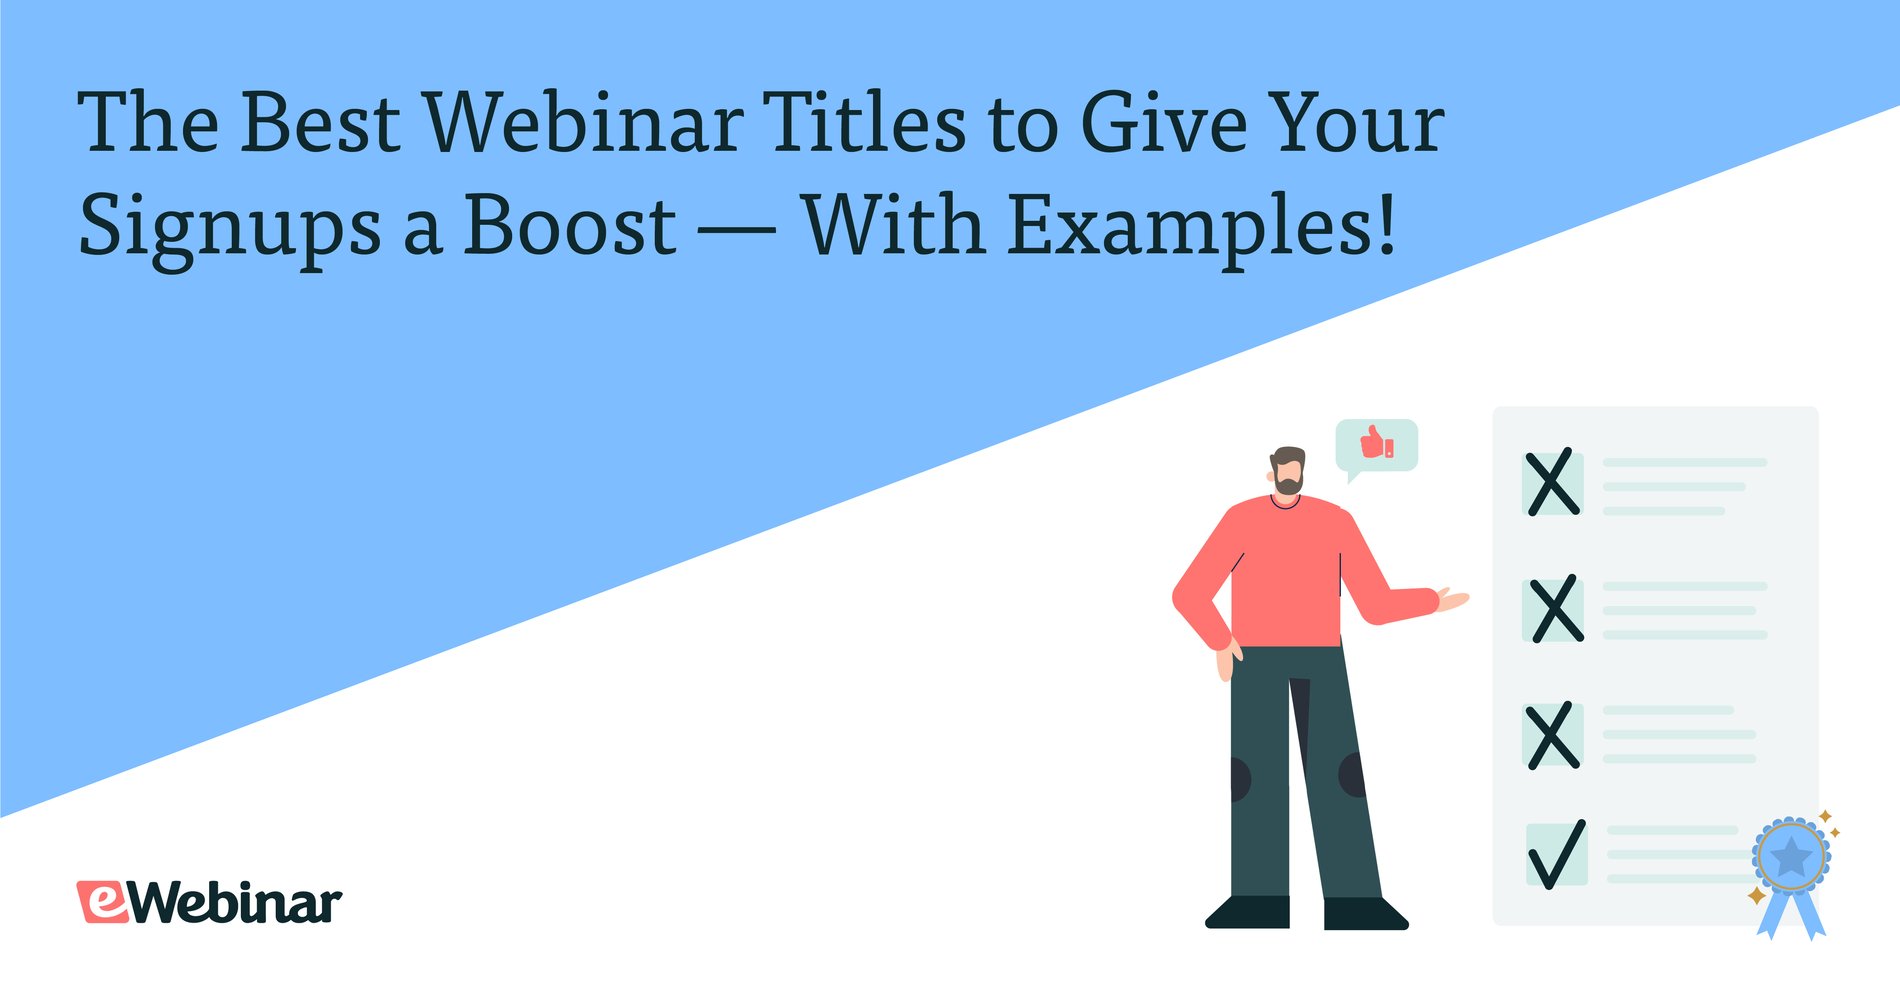 The Best Webinar Titles to Give Your Signups a Boost — With Examples!